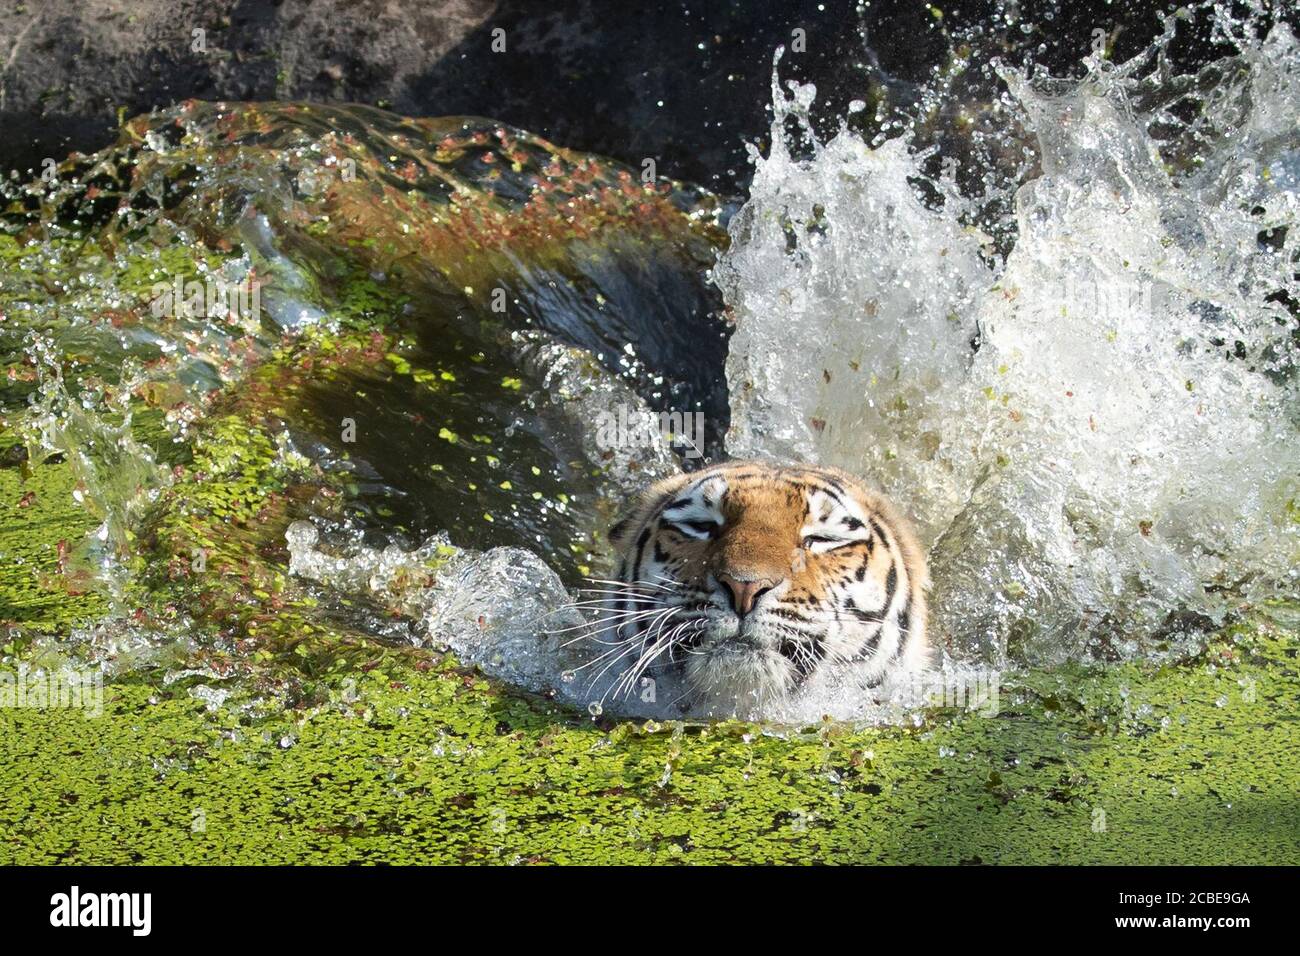 13 August 2020, Hamburg: Female tiger Maruschka (Siberian tiger) jumps into the water basin in the tiger enclosure in Hagenbeck Zoo to get an ice block with frozen food out of the water. Maruschka and her partner Yasha have received a small ice bomb with fish and poultry from their keeper to refresh them in the high summer temperatures. Photo: Christian Charisius/dpa Stock Photo